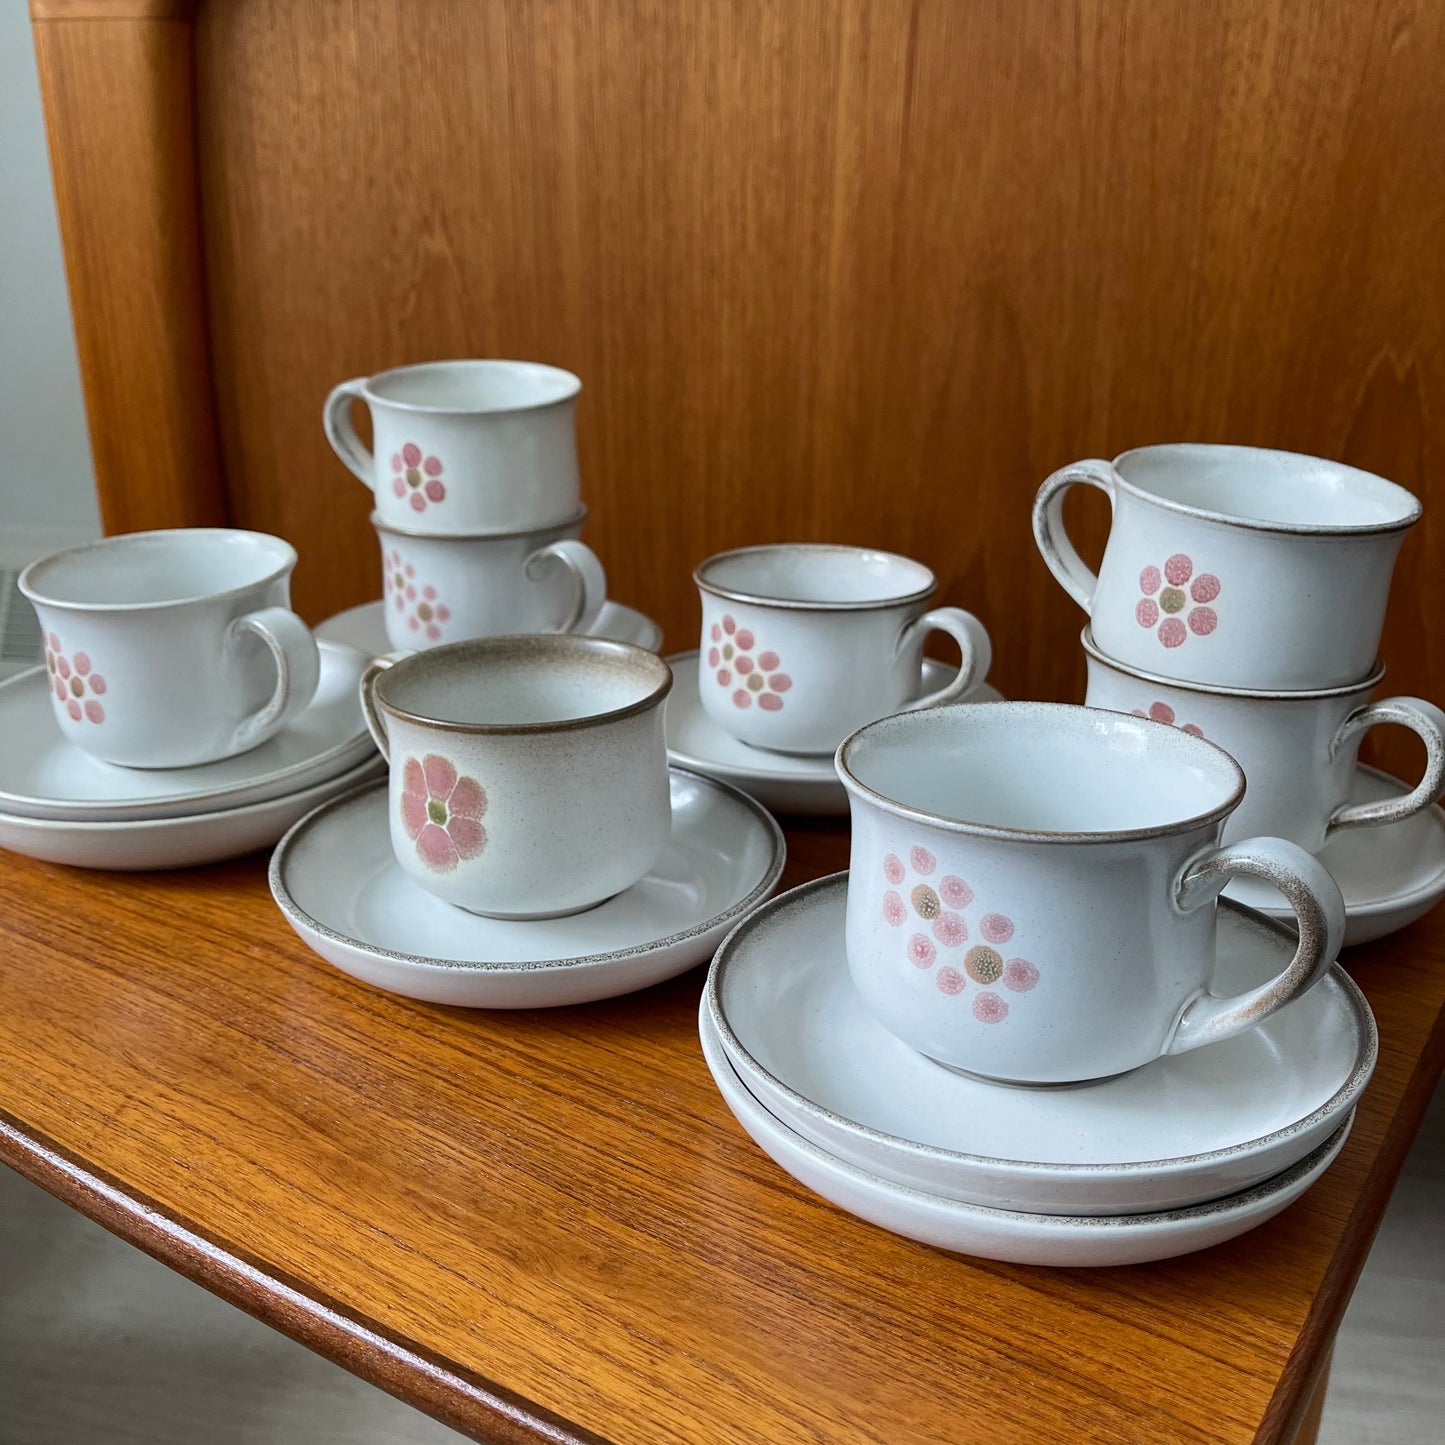 Set of 8 Vintage Denby “Gypsy” Cups and Saucers